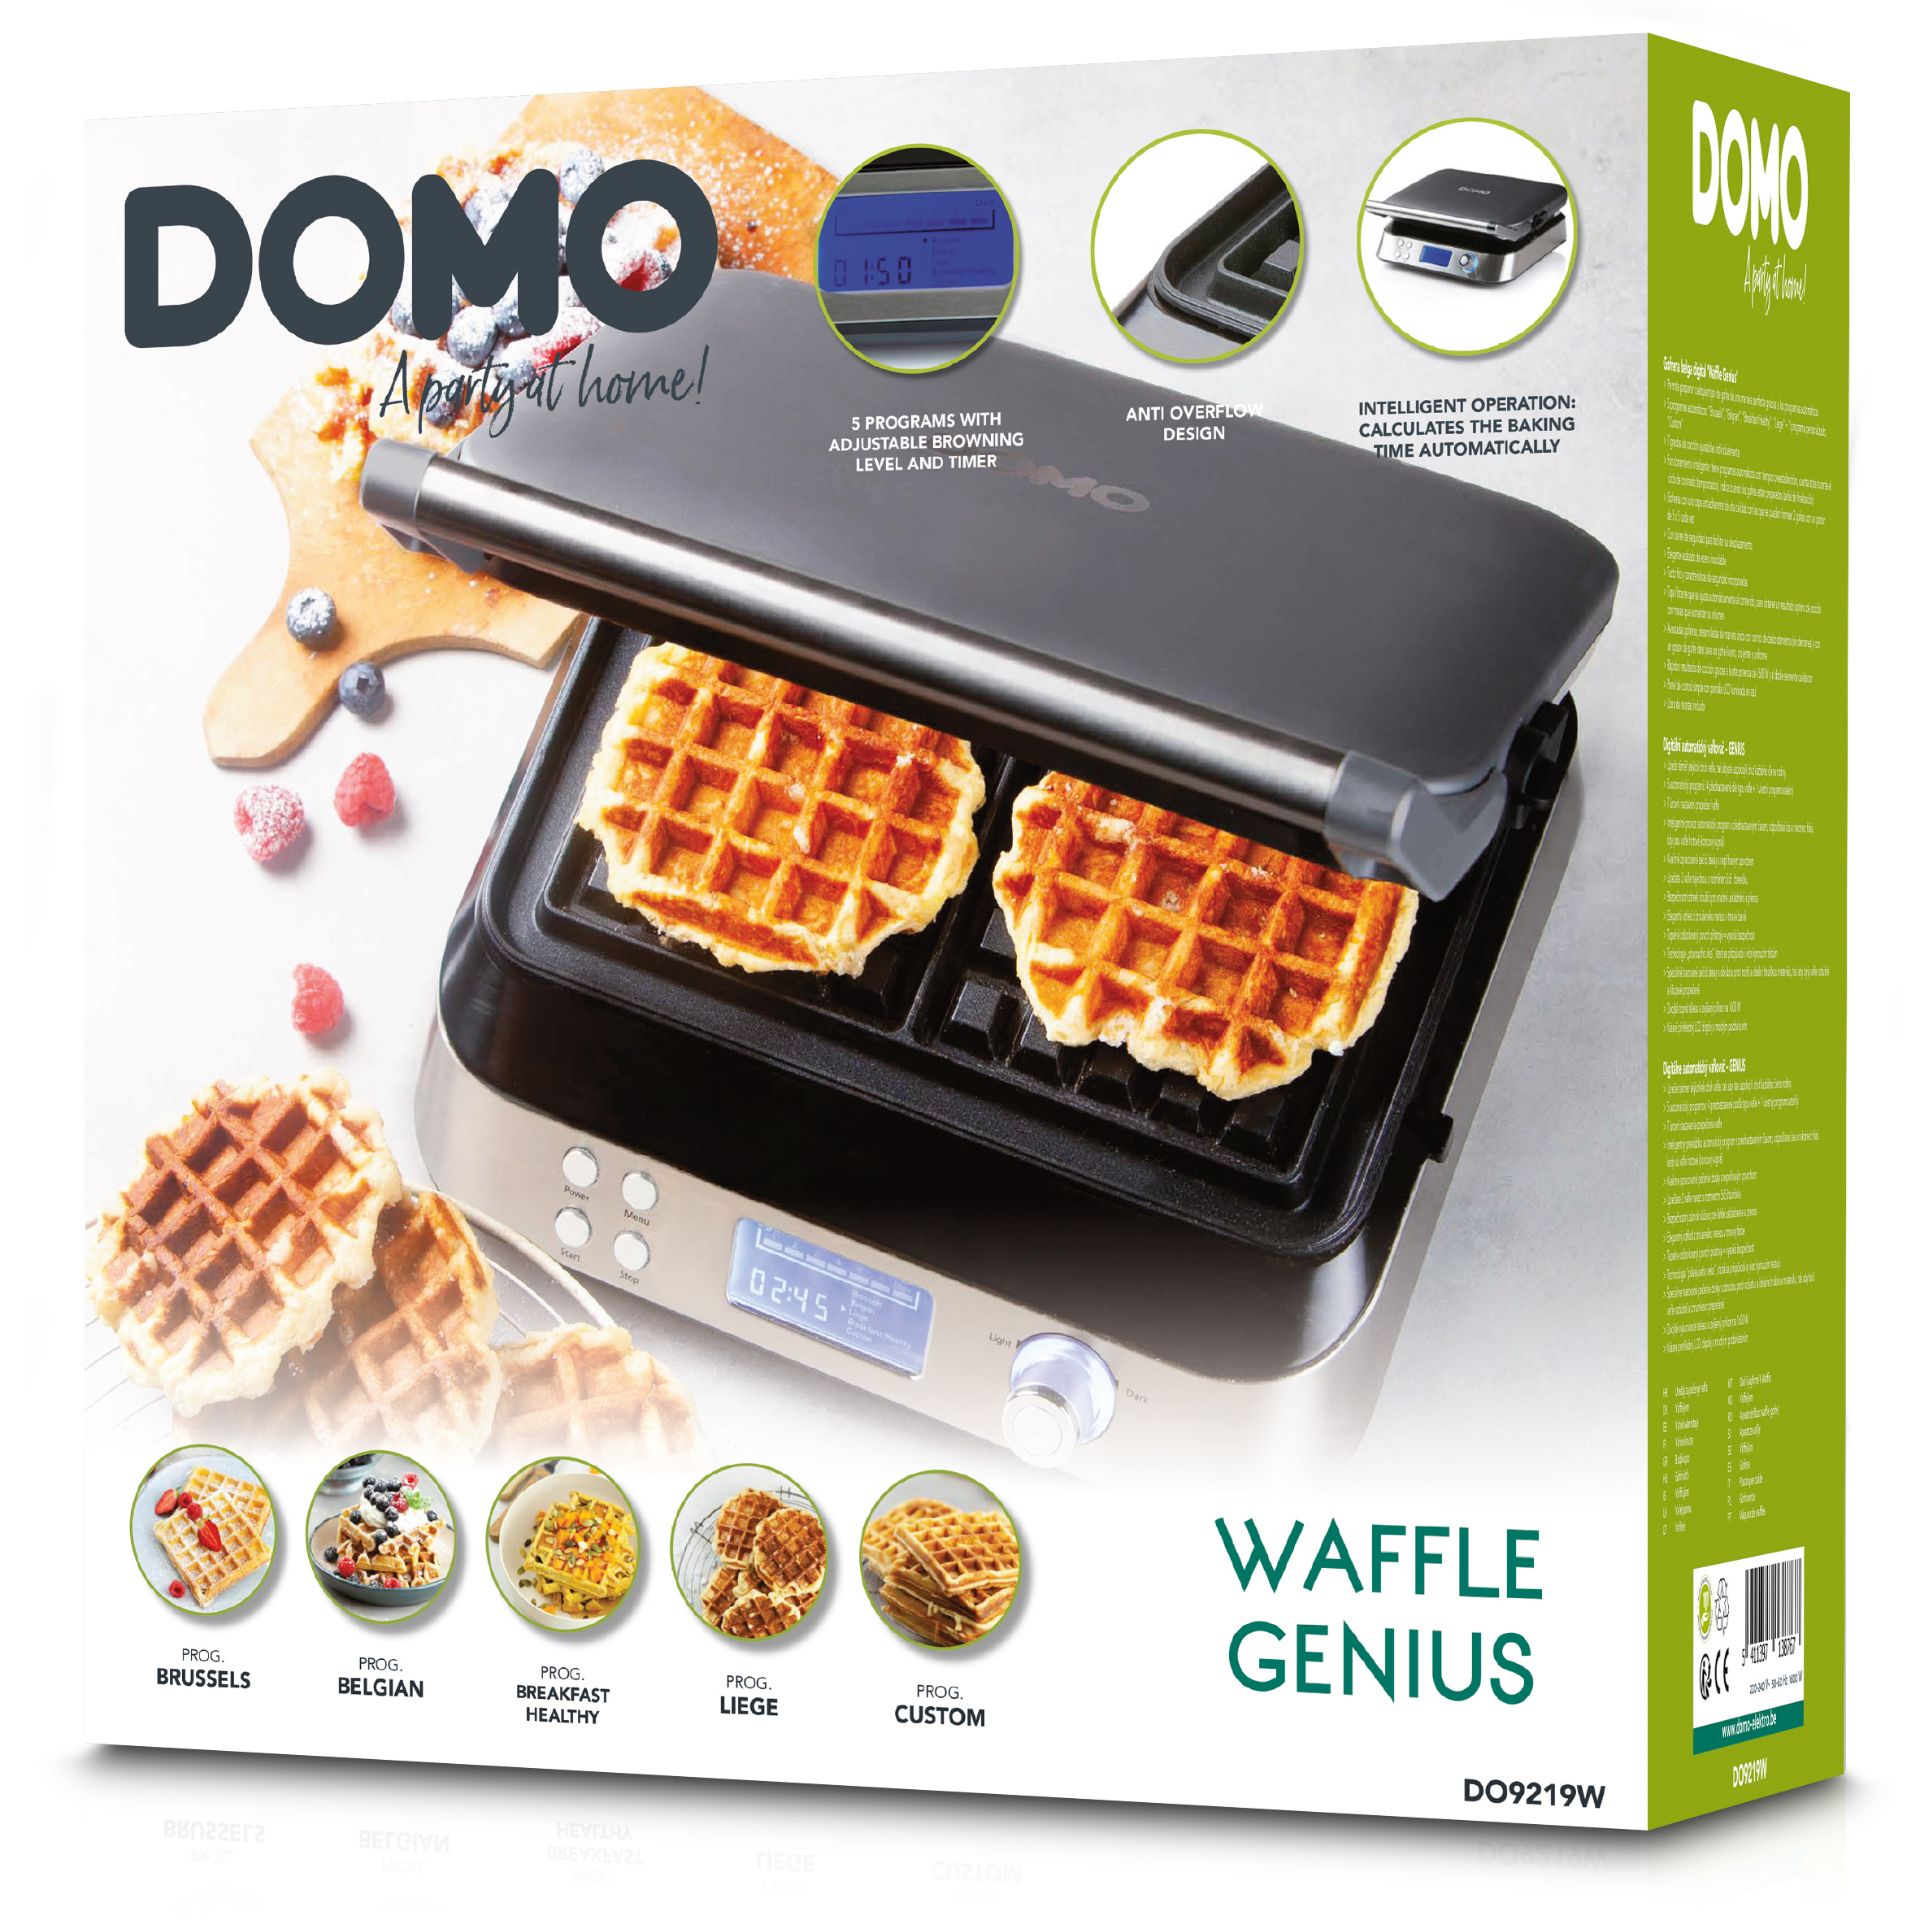 3 x DOMO Belgian Waffle Makers 1600W RRP £130 each £390 total - Image 3 of 7